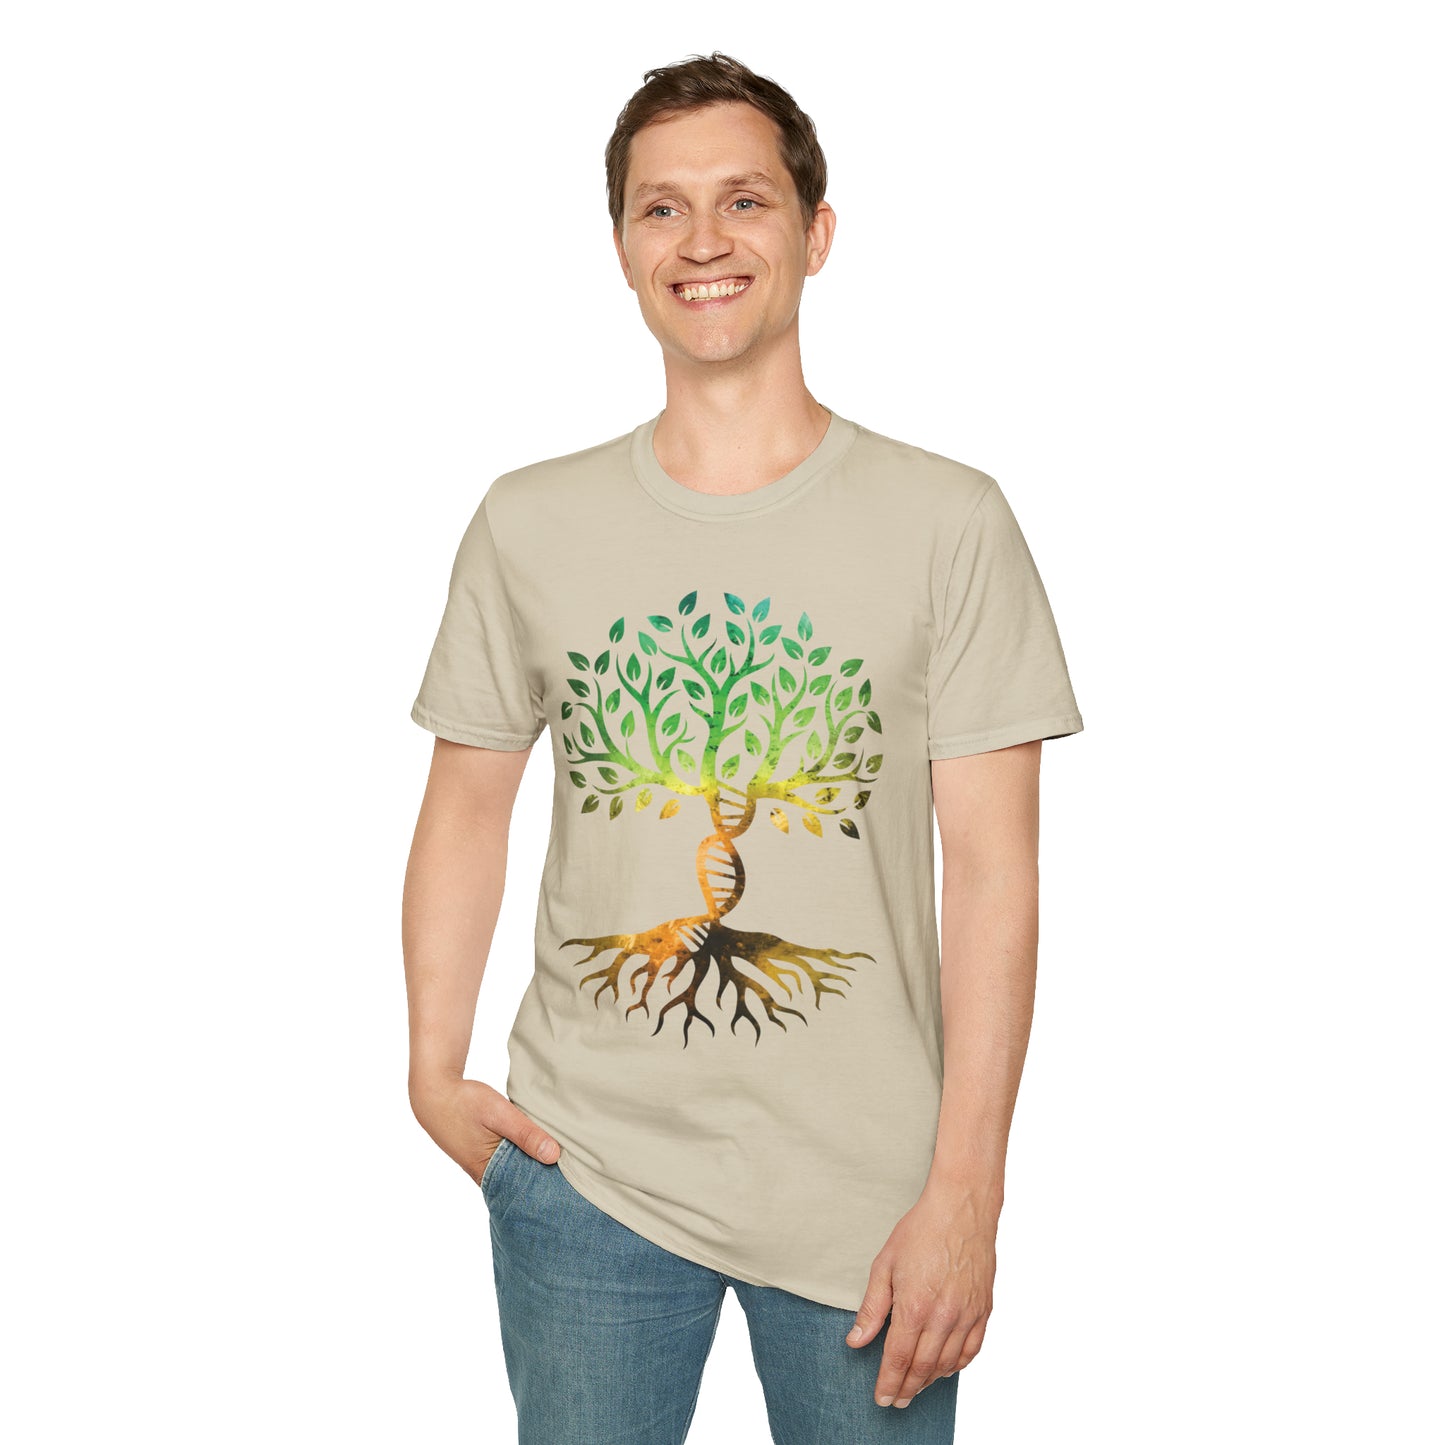 DNA Rooted Tree Softstyle Unisex T-Shirt